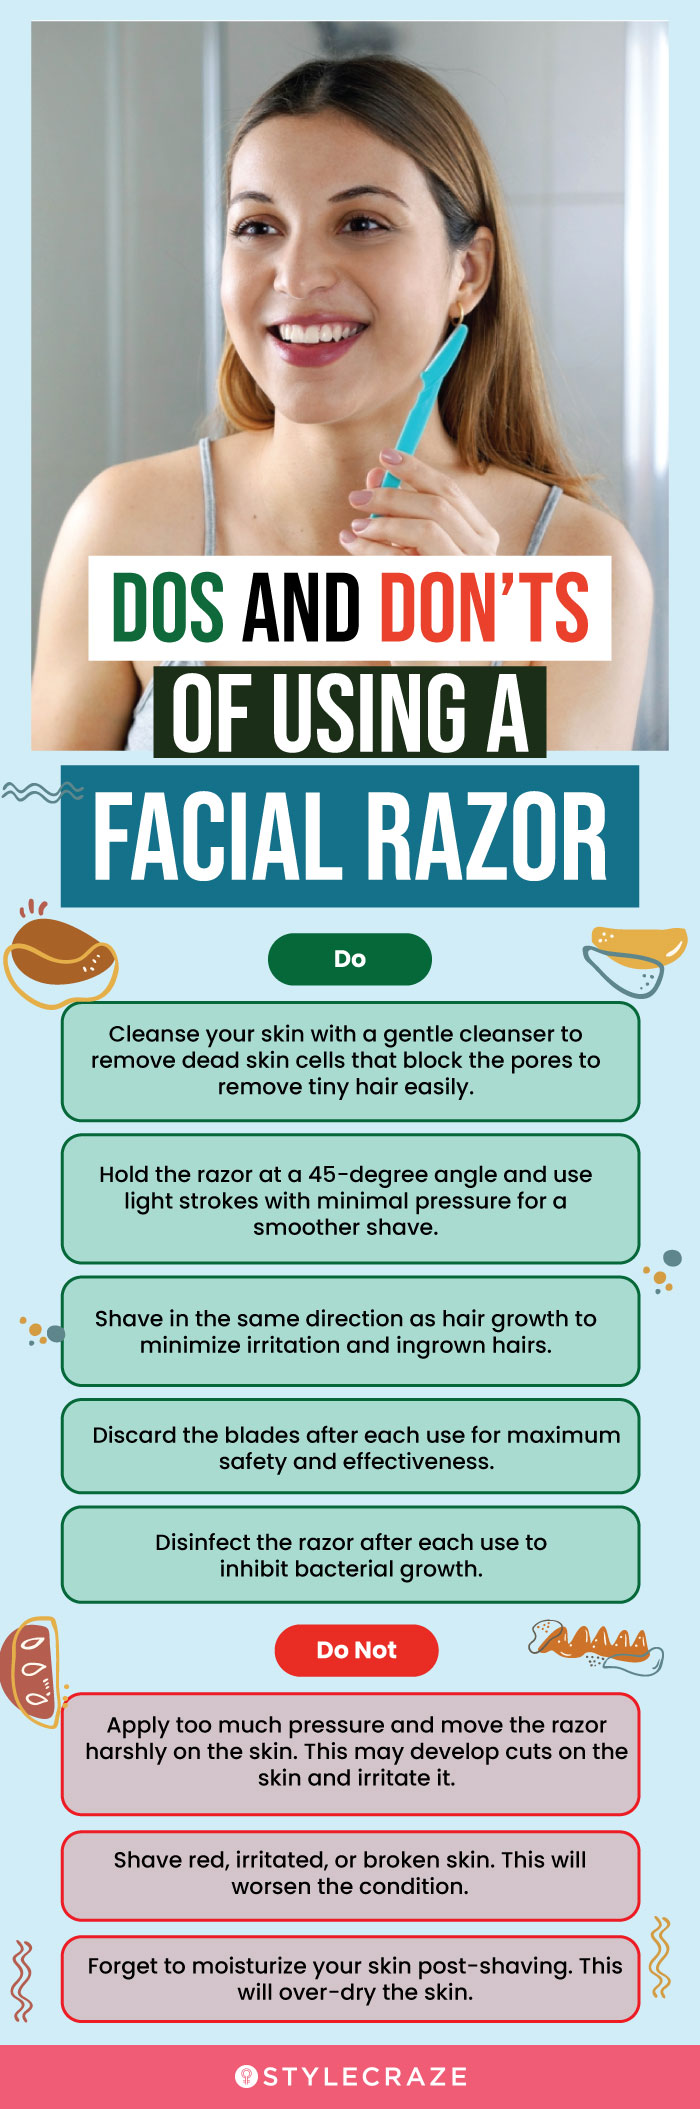 Dos And Don’ts Of Using A Facial Razor (infographic)